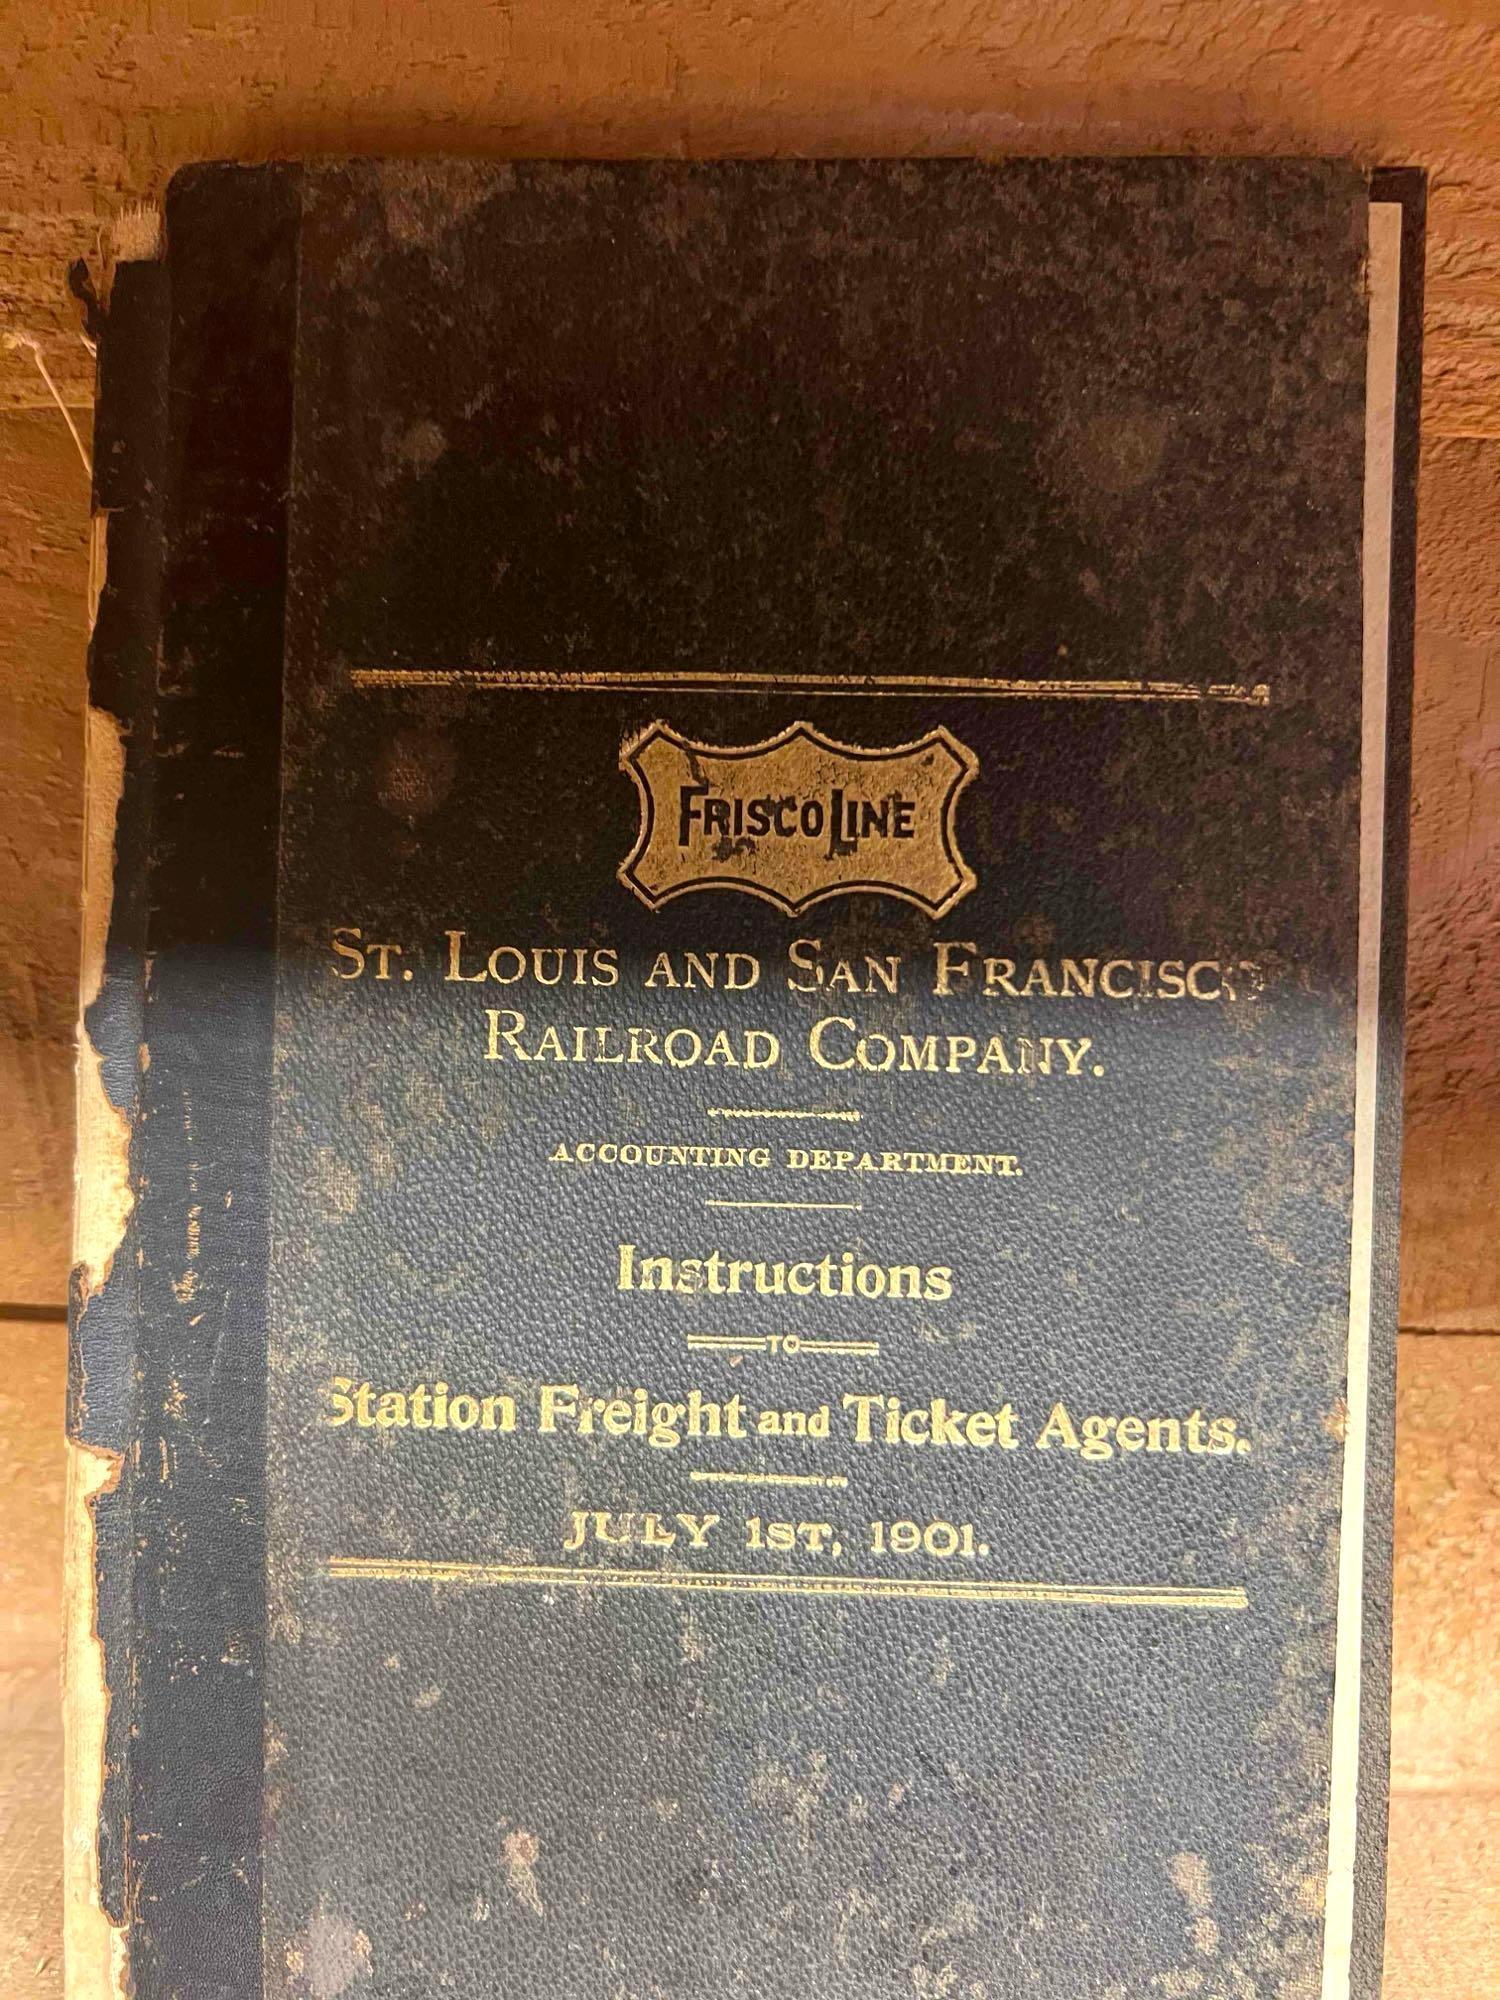 Contents of Shelf - Antique Locks, Pocket Knives, Eisenhower Stamps, and other Misc. Collectibles